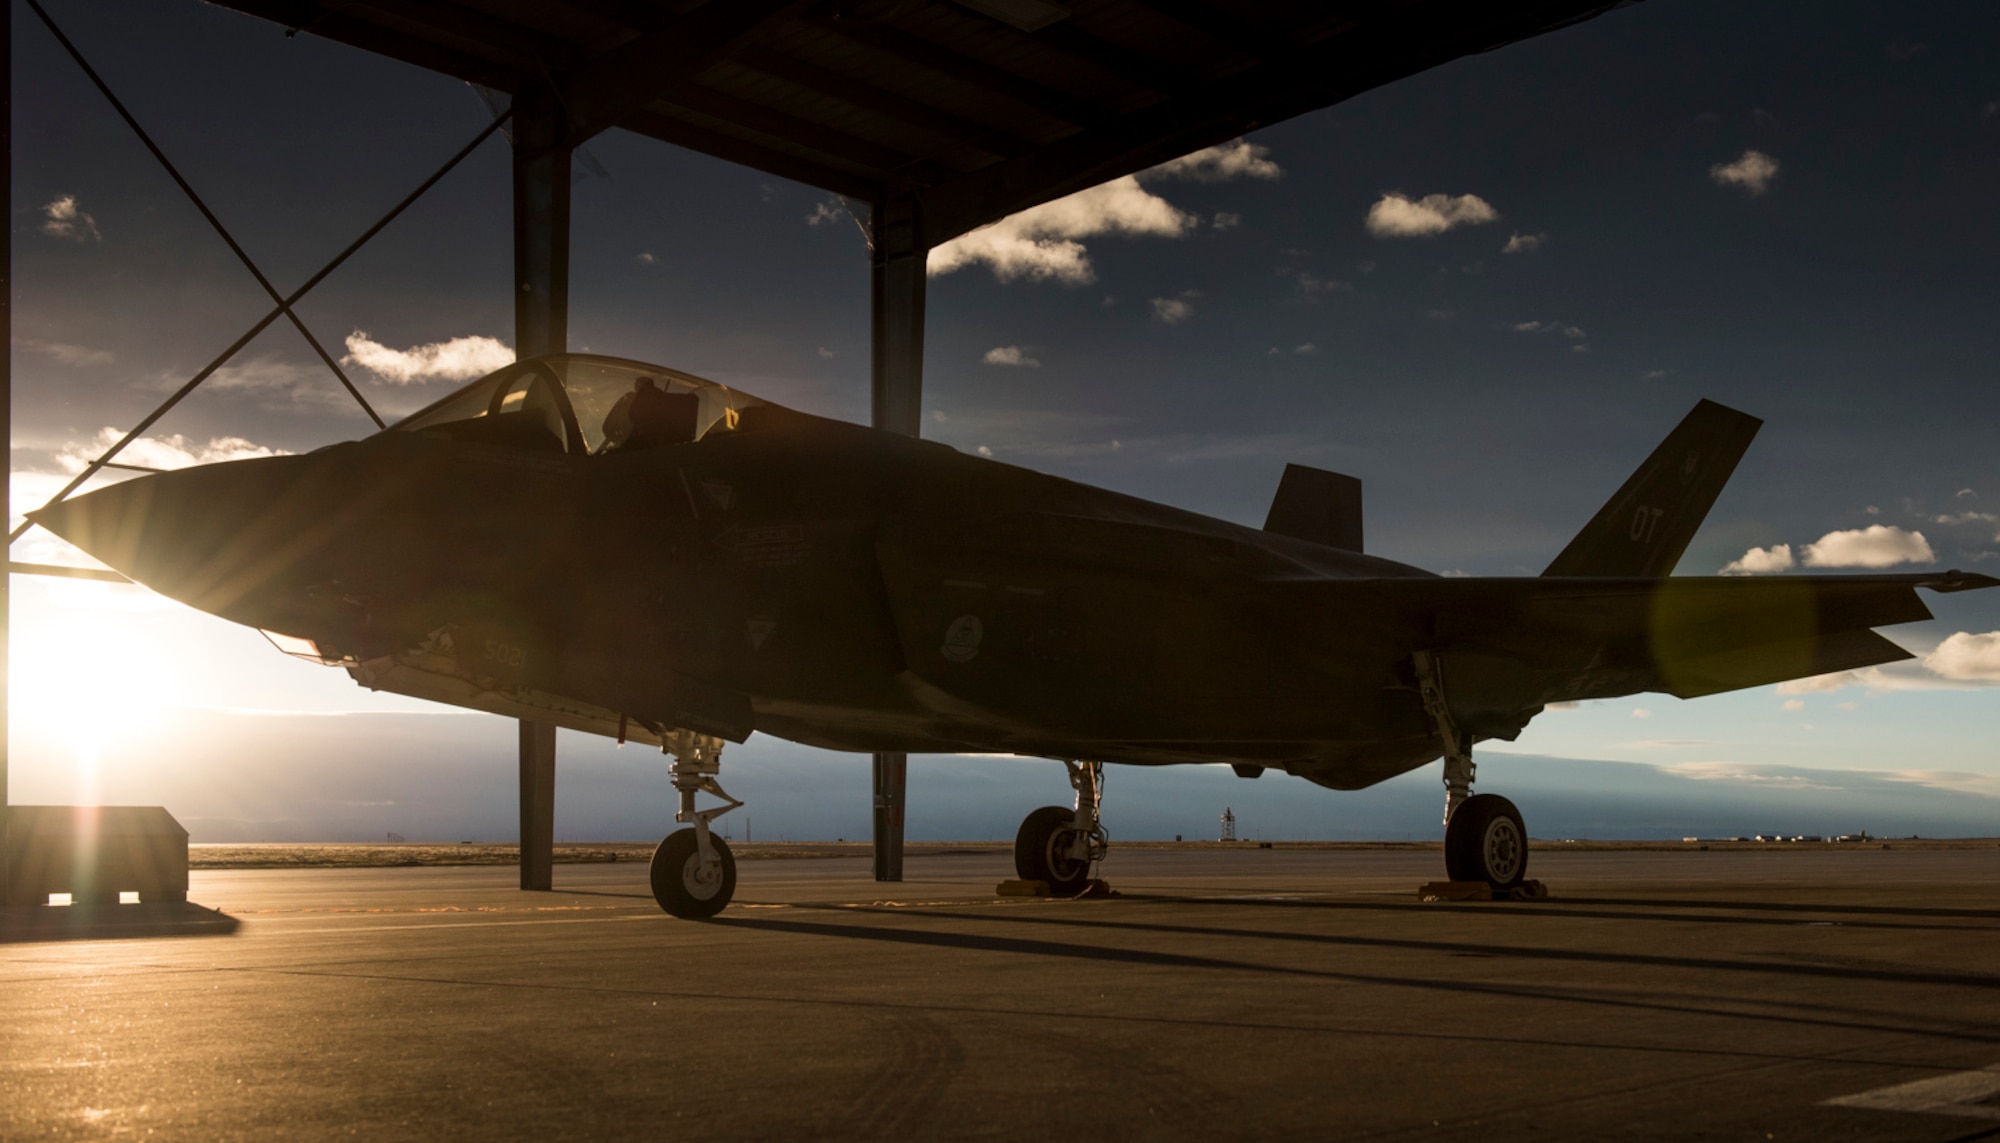 An F-35A Lightning II parks for the night under the sunshades at Mountain Home Air Force Base, Idaho, Feb. 18, 2016. The F-35s’ combat capabilities are being tested through an operational deployment test at Mountain Home AFB range complexes. (U.S. Air Force photo/Senior Airman Jeremy L. Mosier)